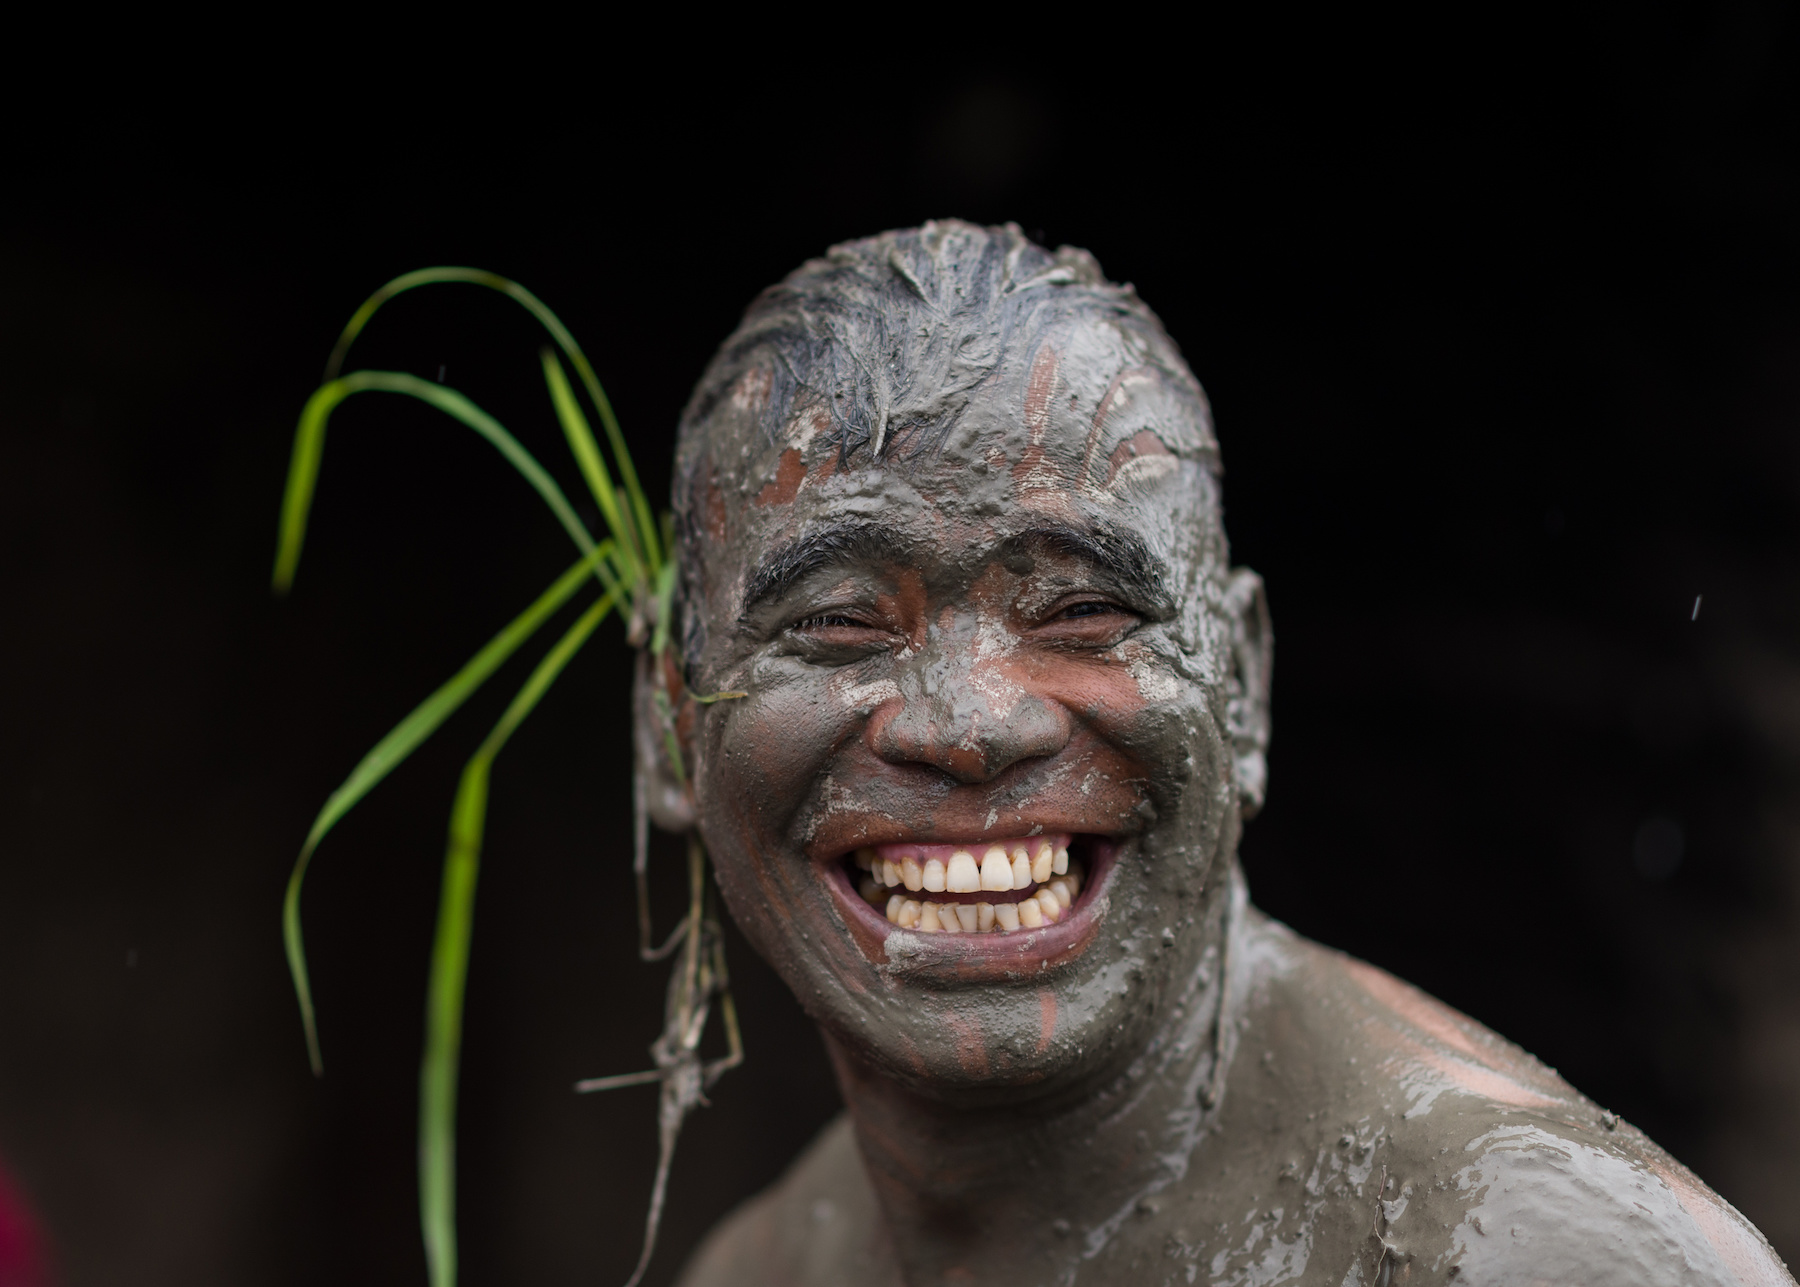 A man's face smiles while being covered in mud